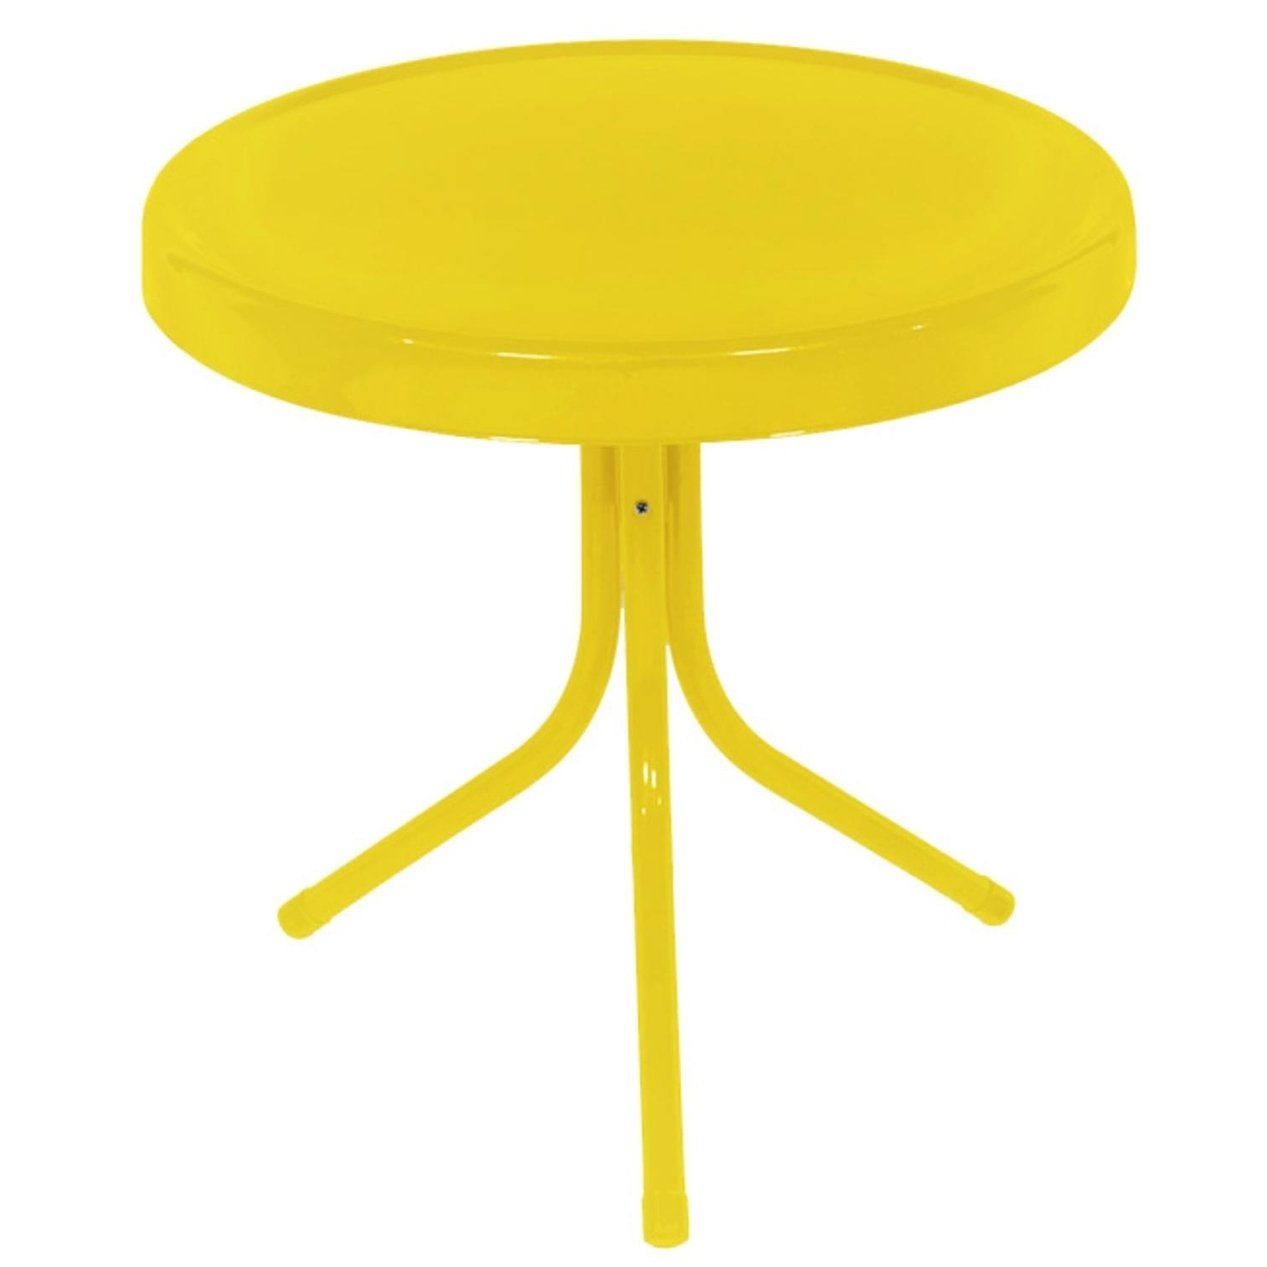 sunshine yellow retro metal tulip outdoor side table free shipping today toddler drum stool candle decorations pier one clearance chairs tree stump concrete bedside long thin